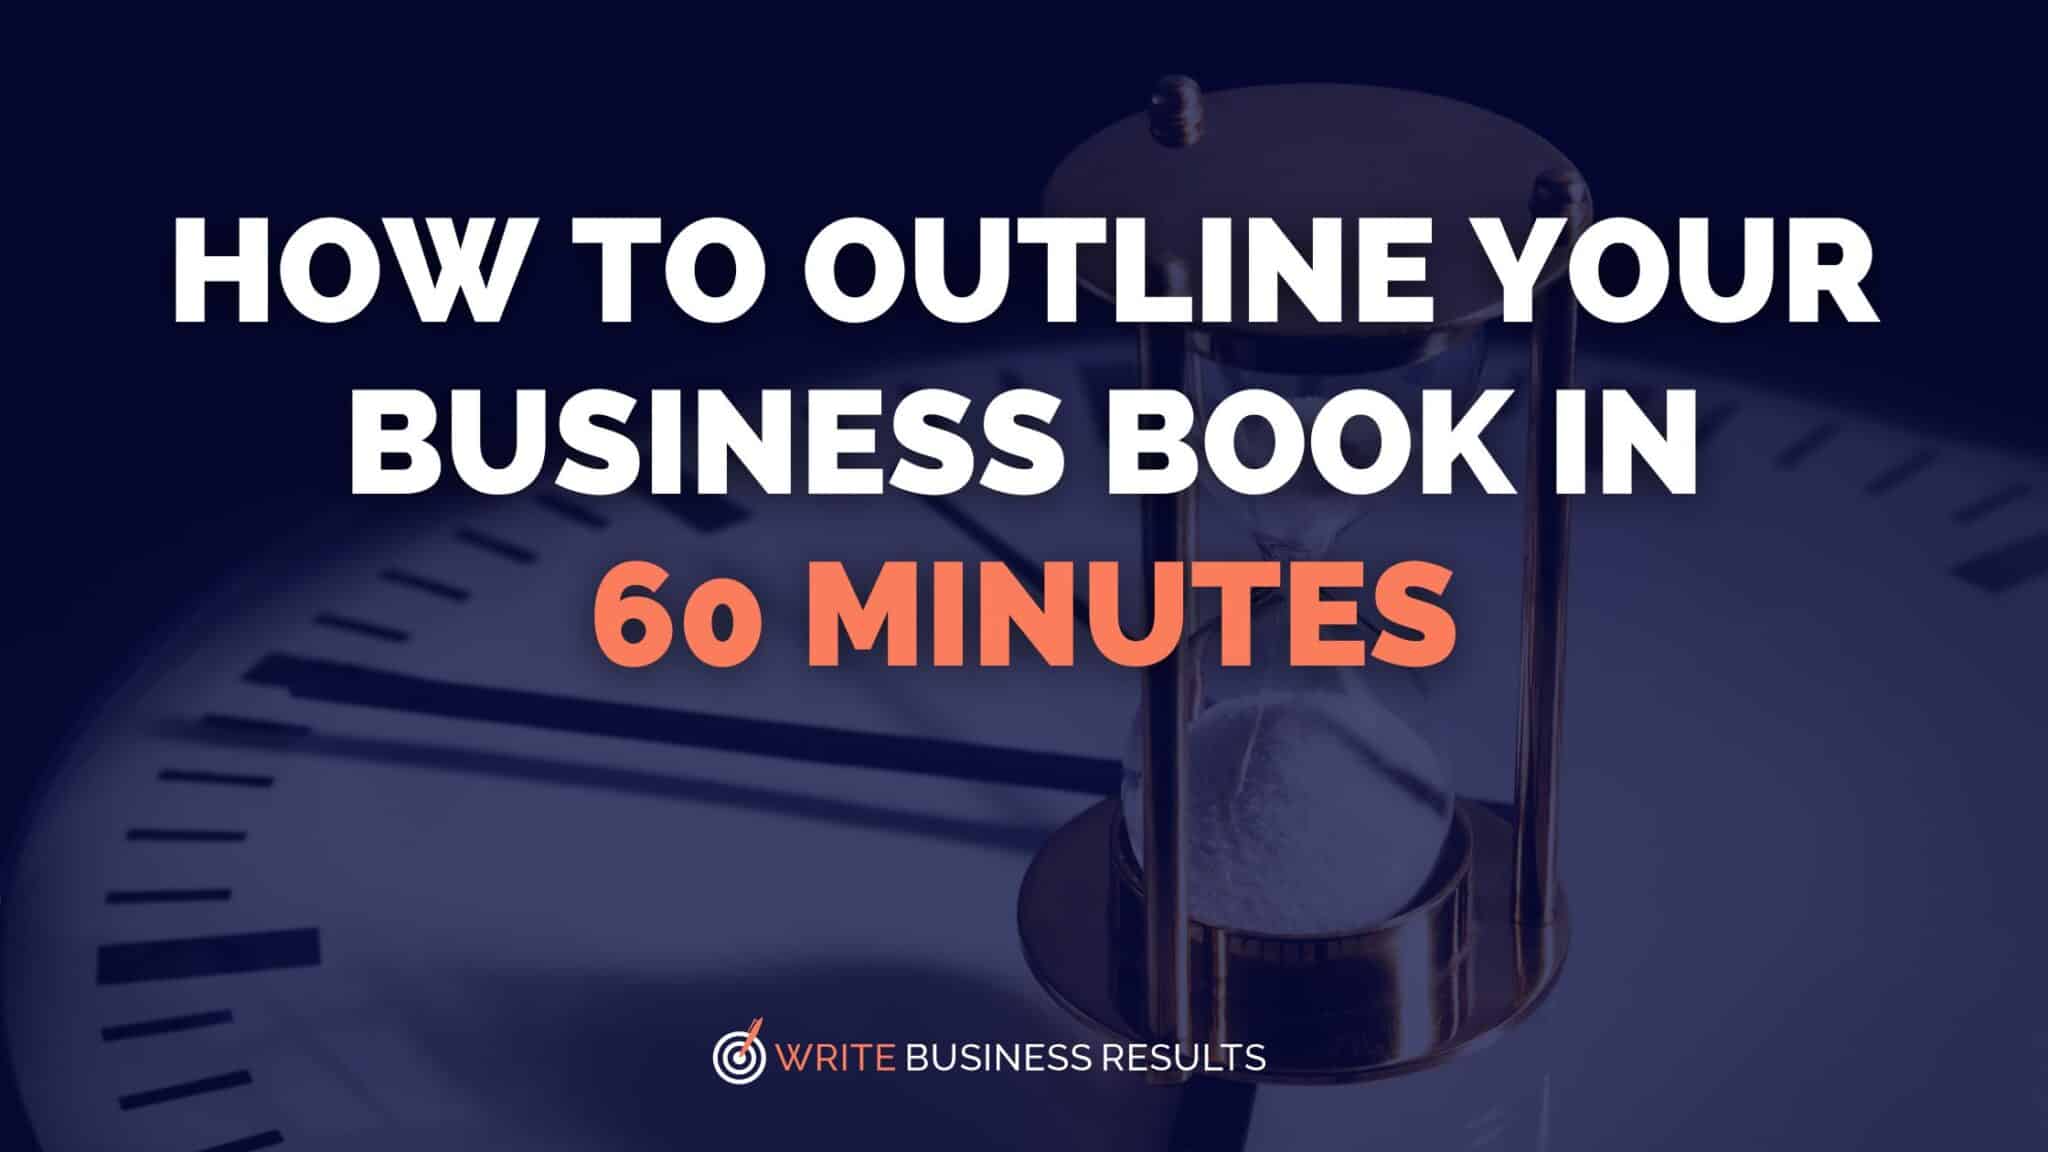 How To Outline Your Business Book In 60 Minutes